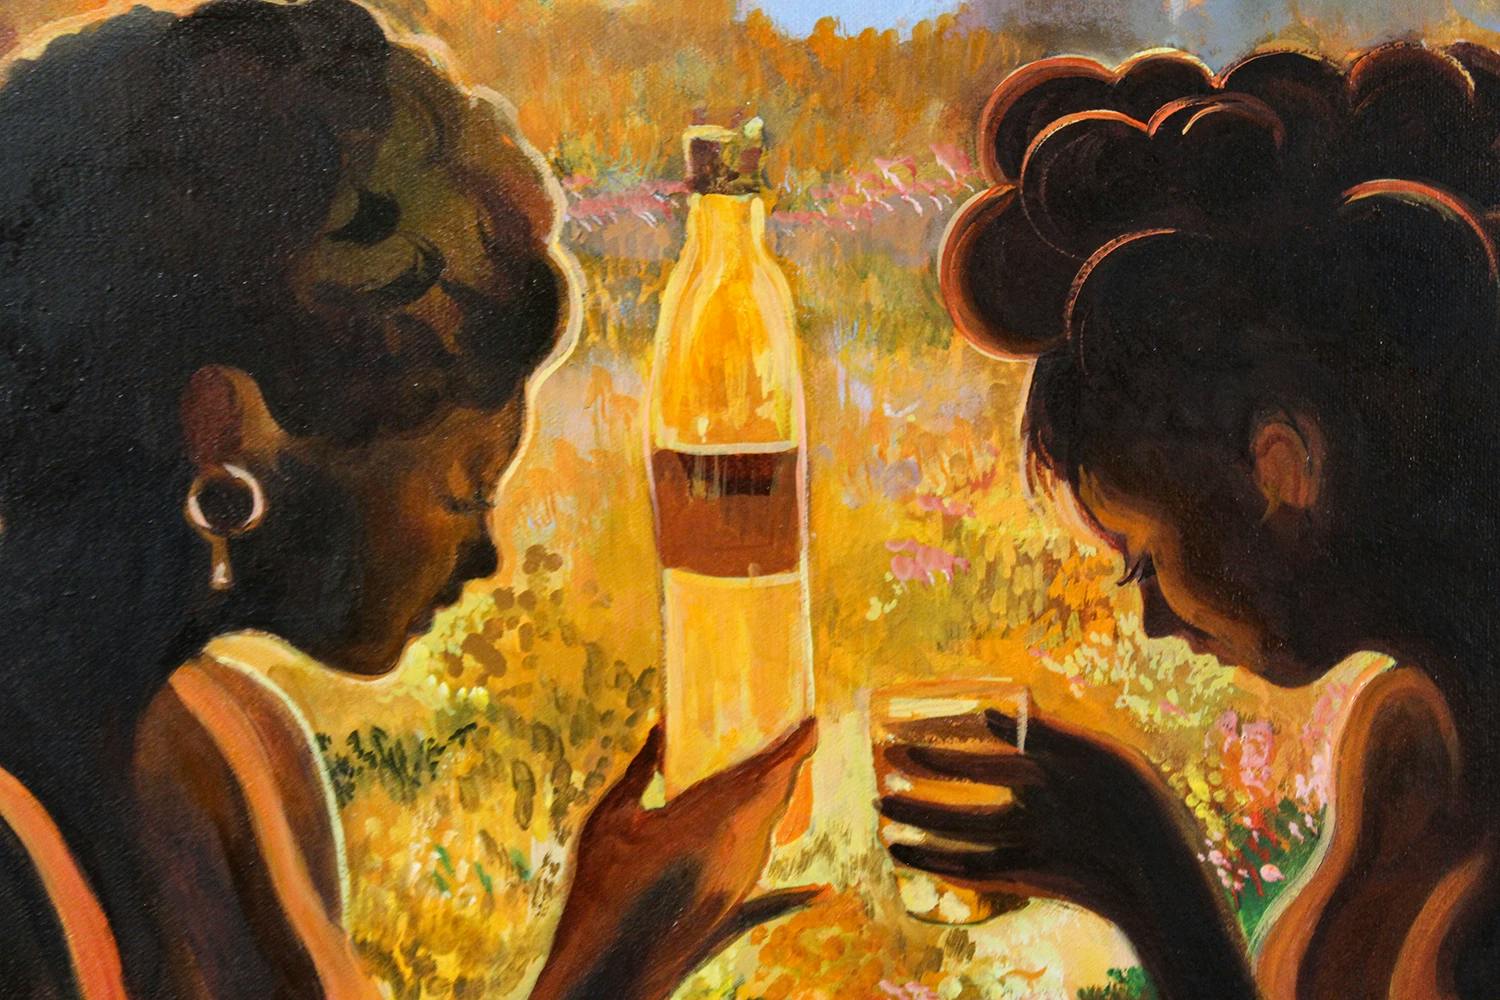 Close-up of a figurative painting by artist Nefertiti Jenkins of two women sharing a drink in a secluded field.